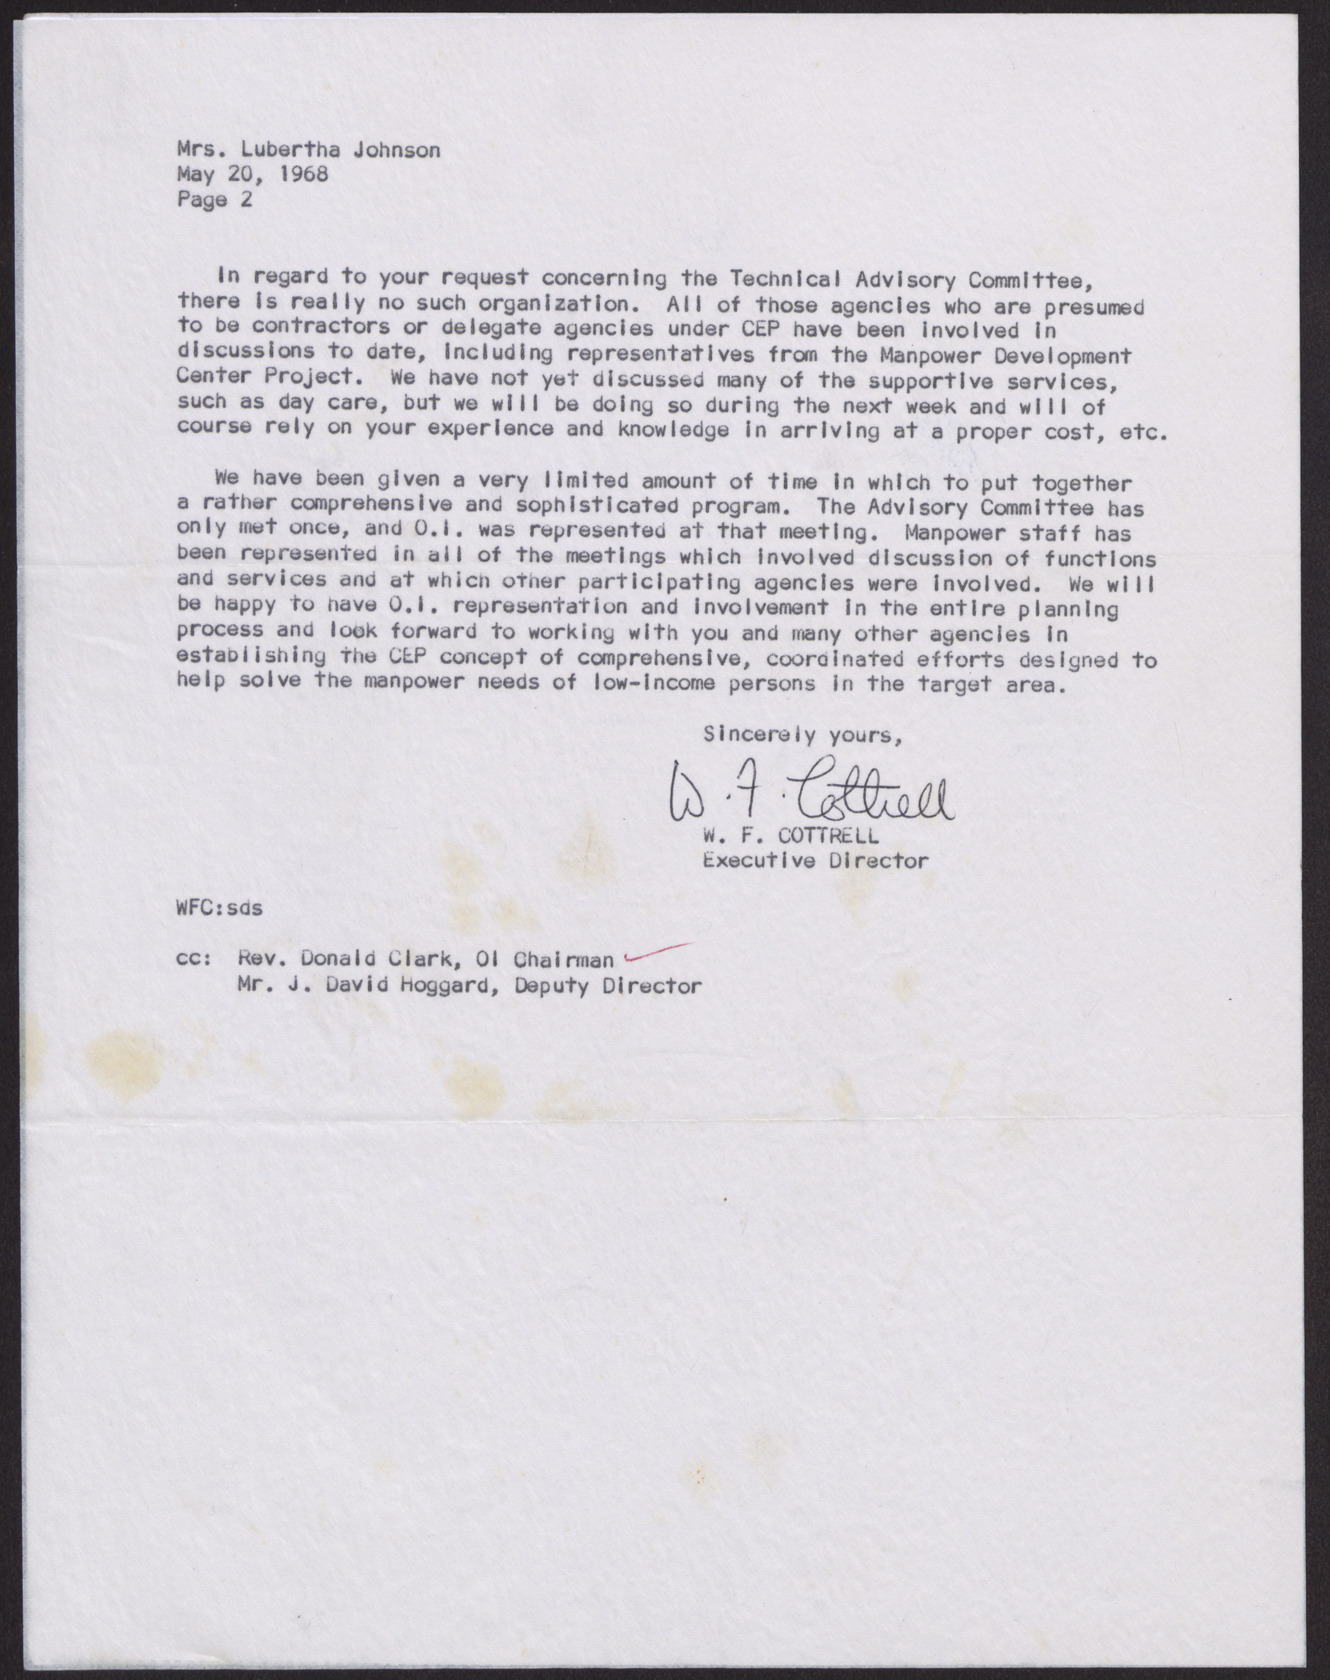 Letter to Mrs. Lubertha Johnson from W. F. Cottrell (2 pages), May 20, 1968, page 2